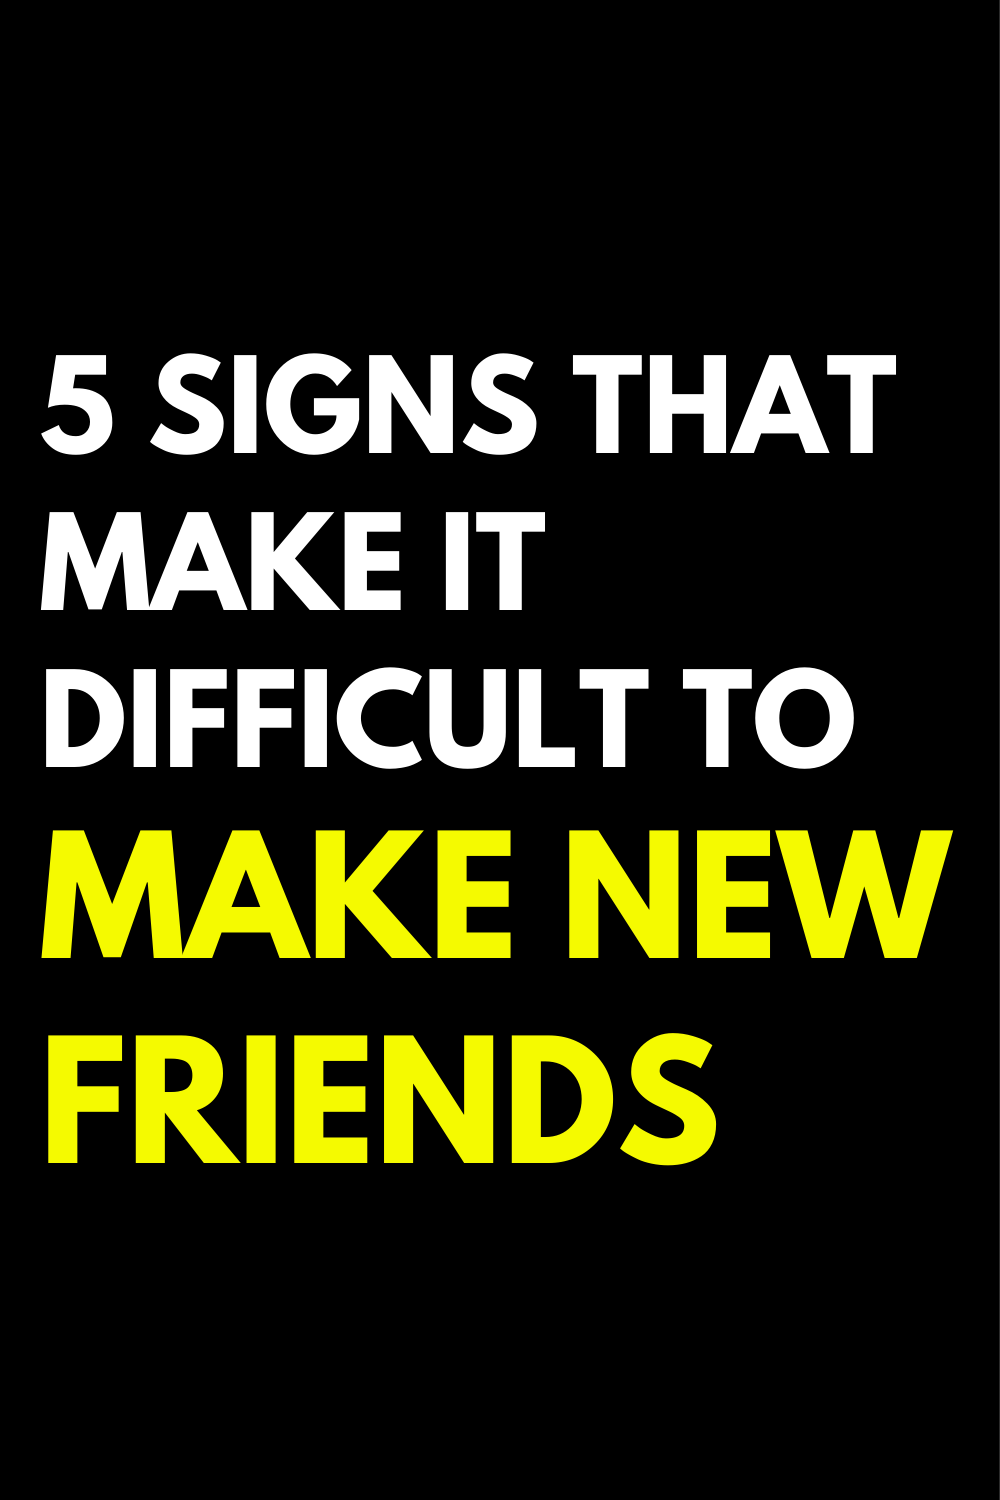 5 signs that make it difficult to make new friends